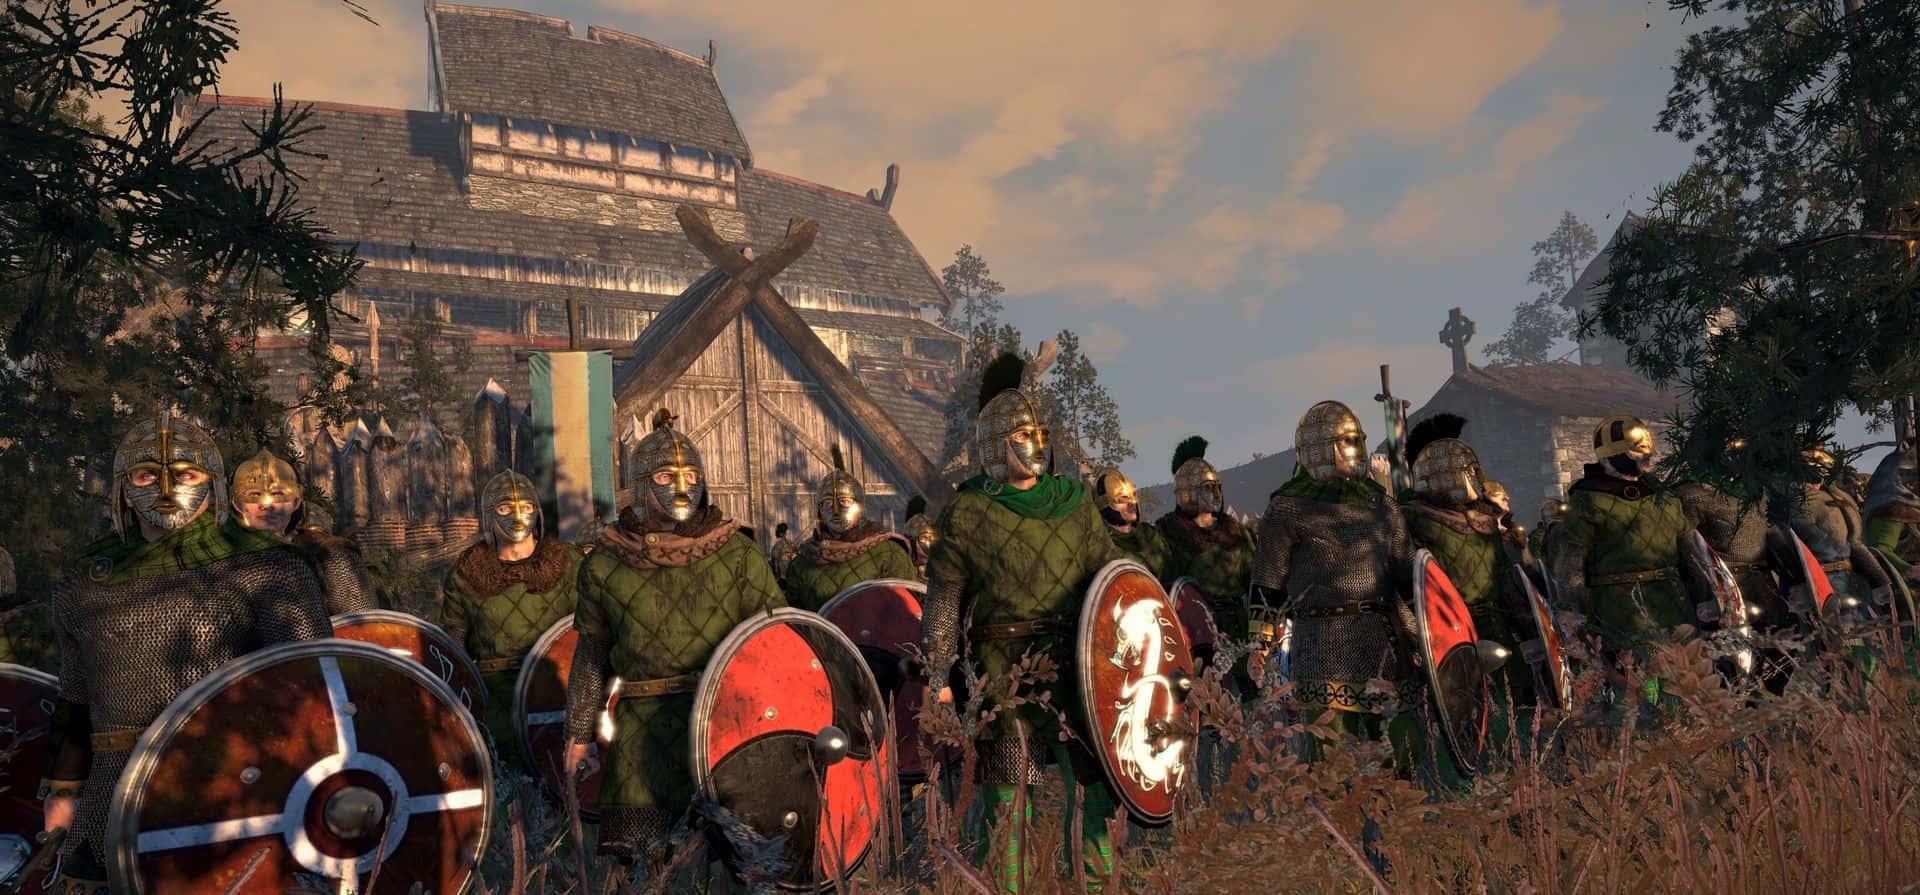 A Group Of Men In Armor Are Standing In A Field Background